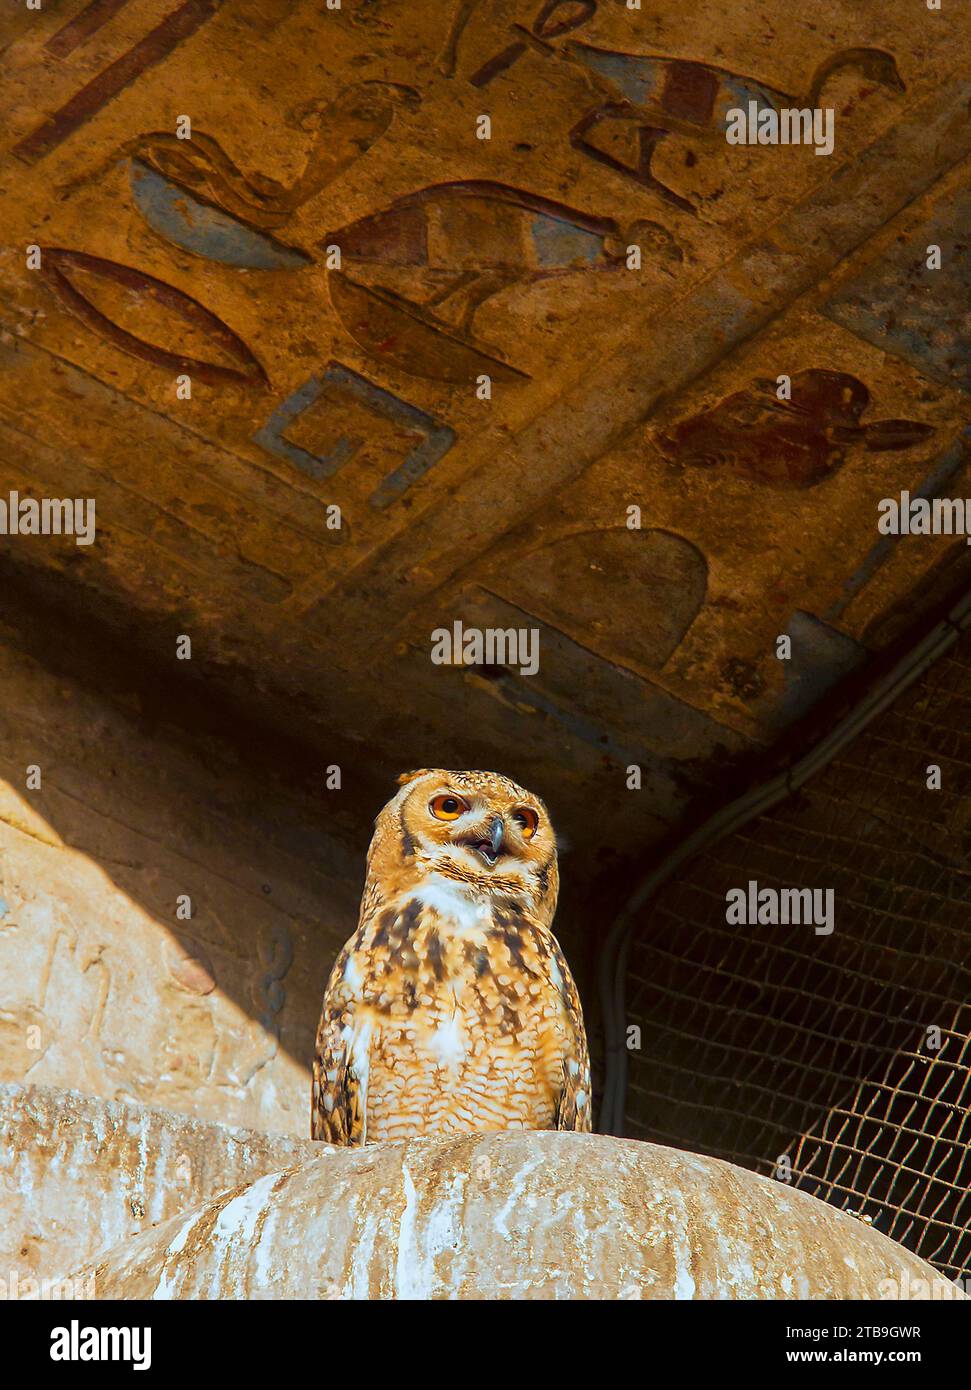 Close-up of a Pharaoh Desert Eagle Owl (Bubo ascalaphus), one of the sacred symbols of Egyptian hieroglyphs, perched under a stone ceiling with bas... Stock Photo